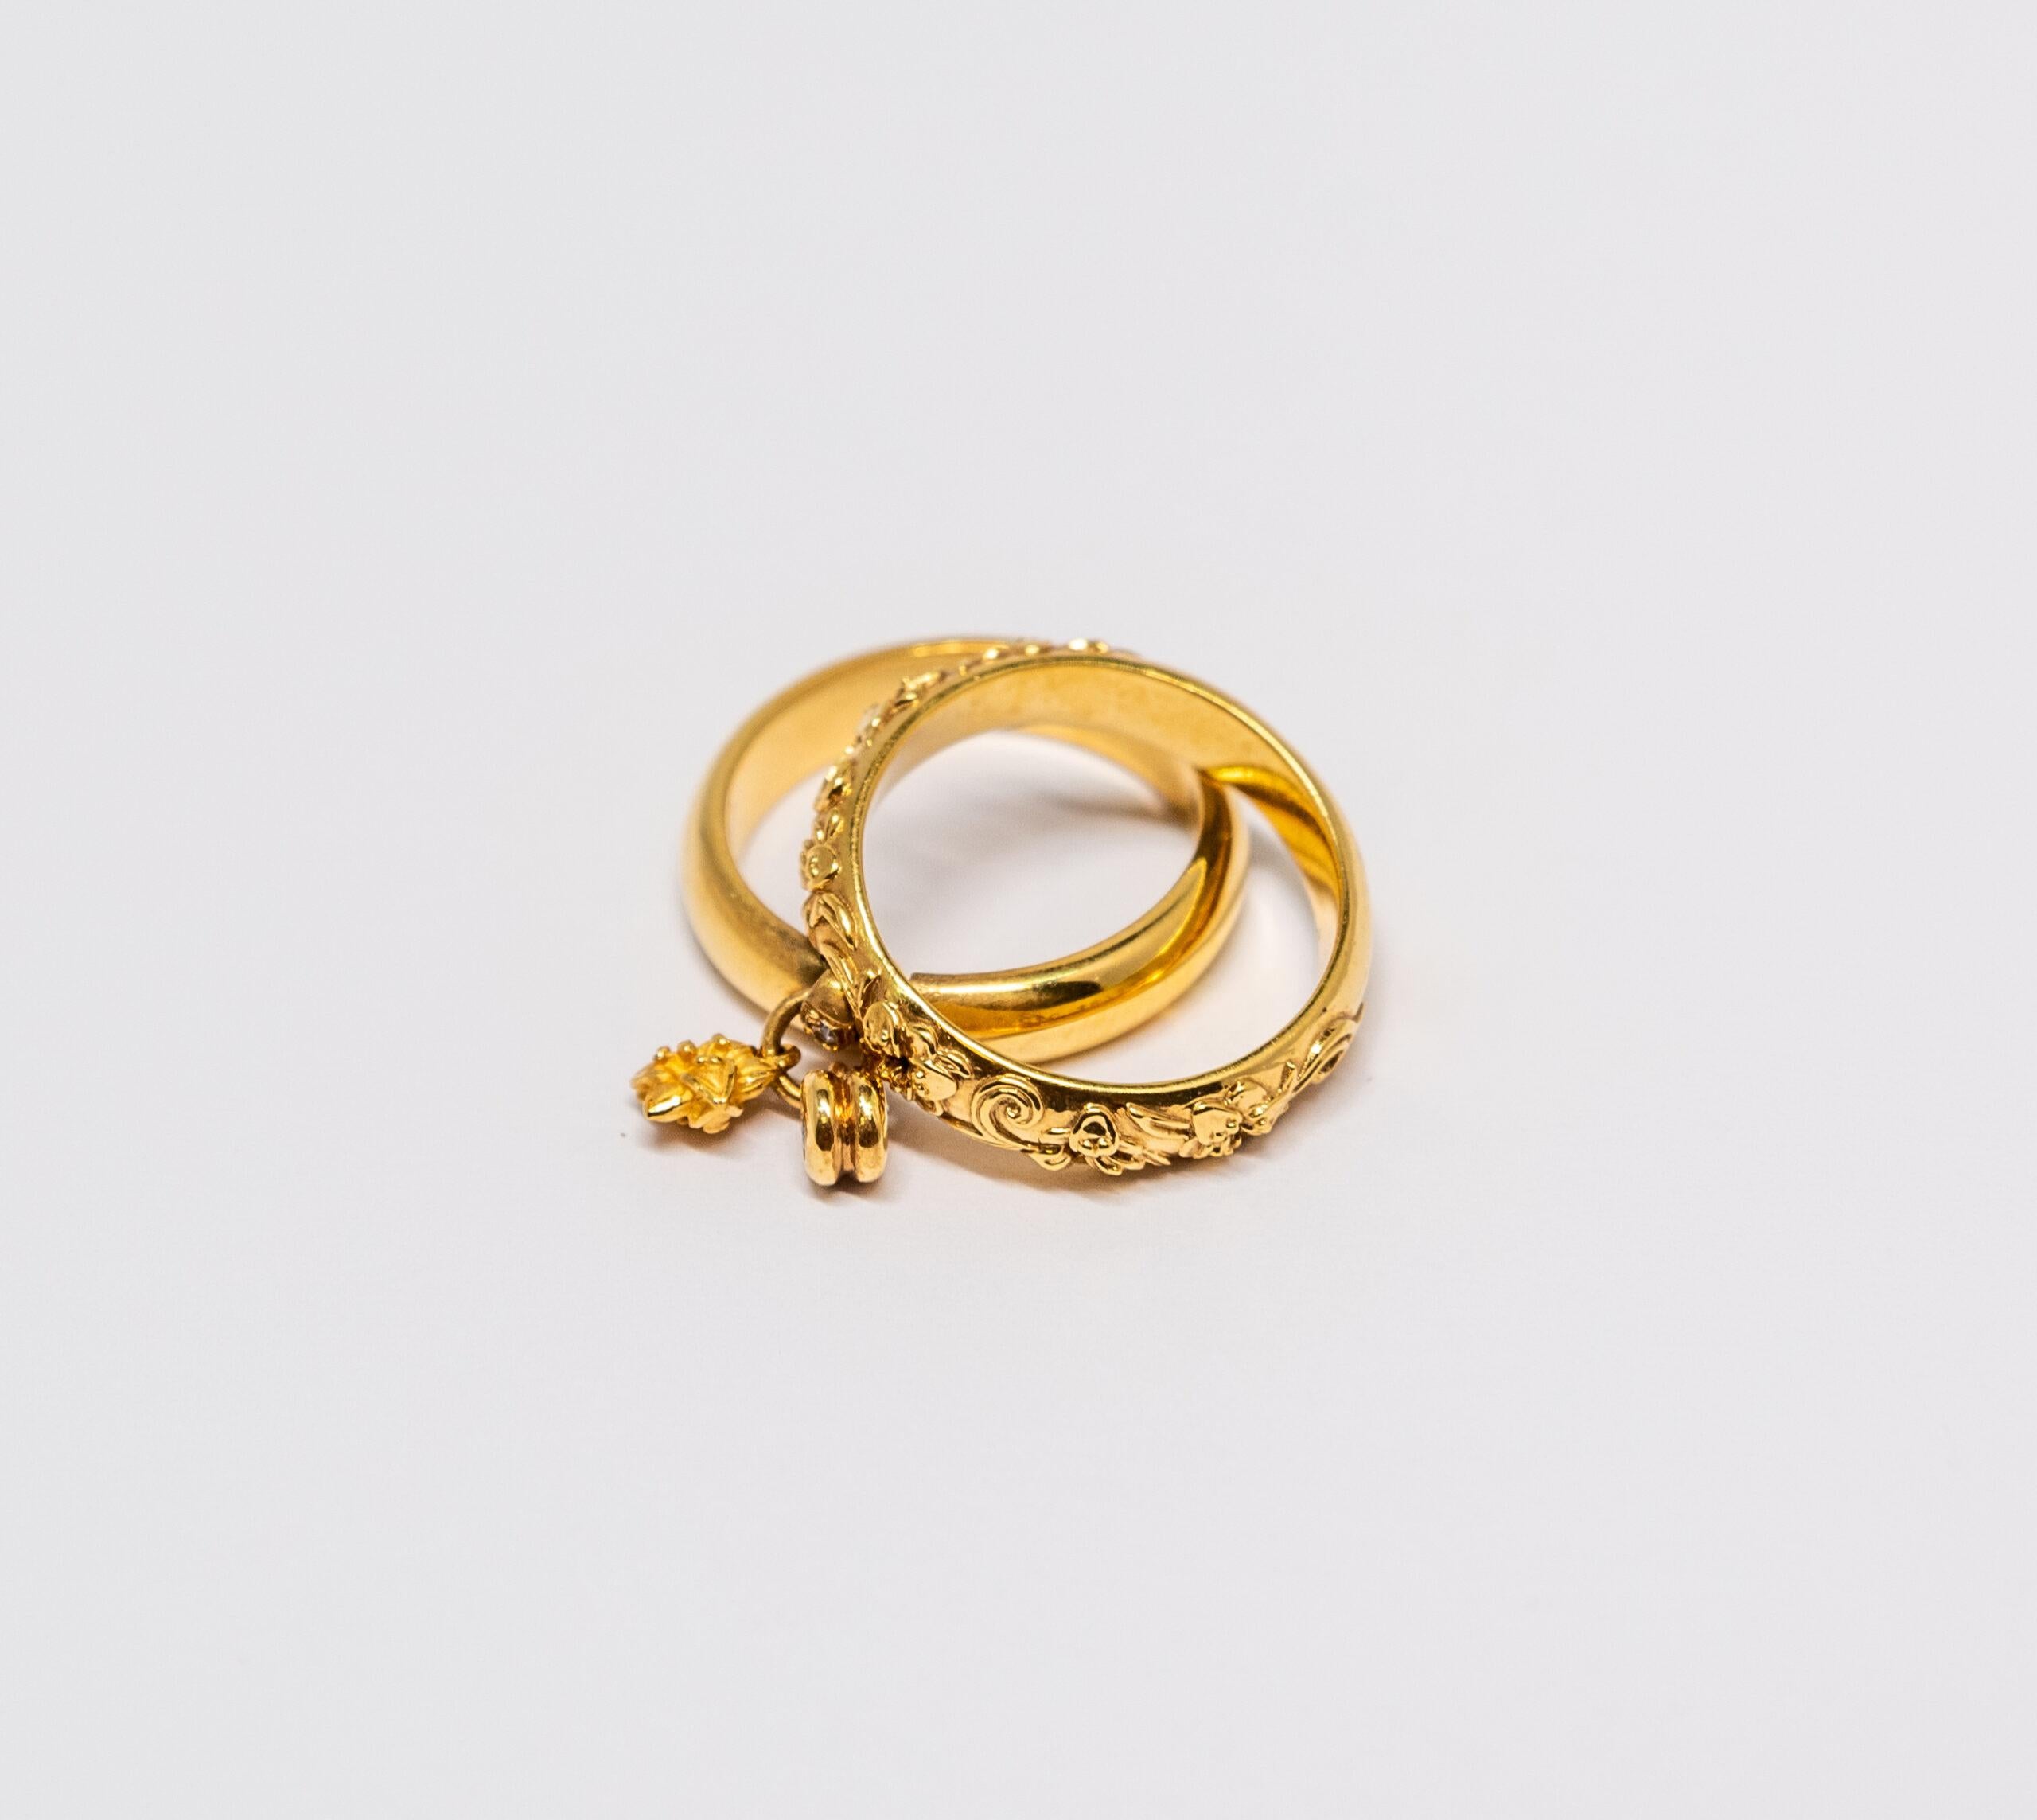 This ring is made of 18K Yellow Gold. Two rings are connected by link. One ring is smooth and the second ring is decorated with a floral pattern and Diamonds.

Size – 54 (7 US)